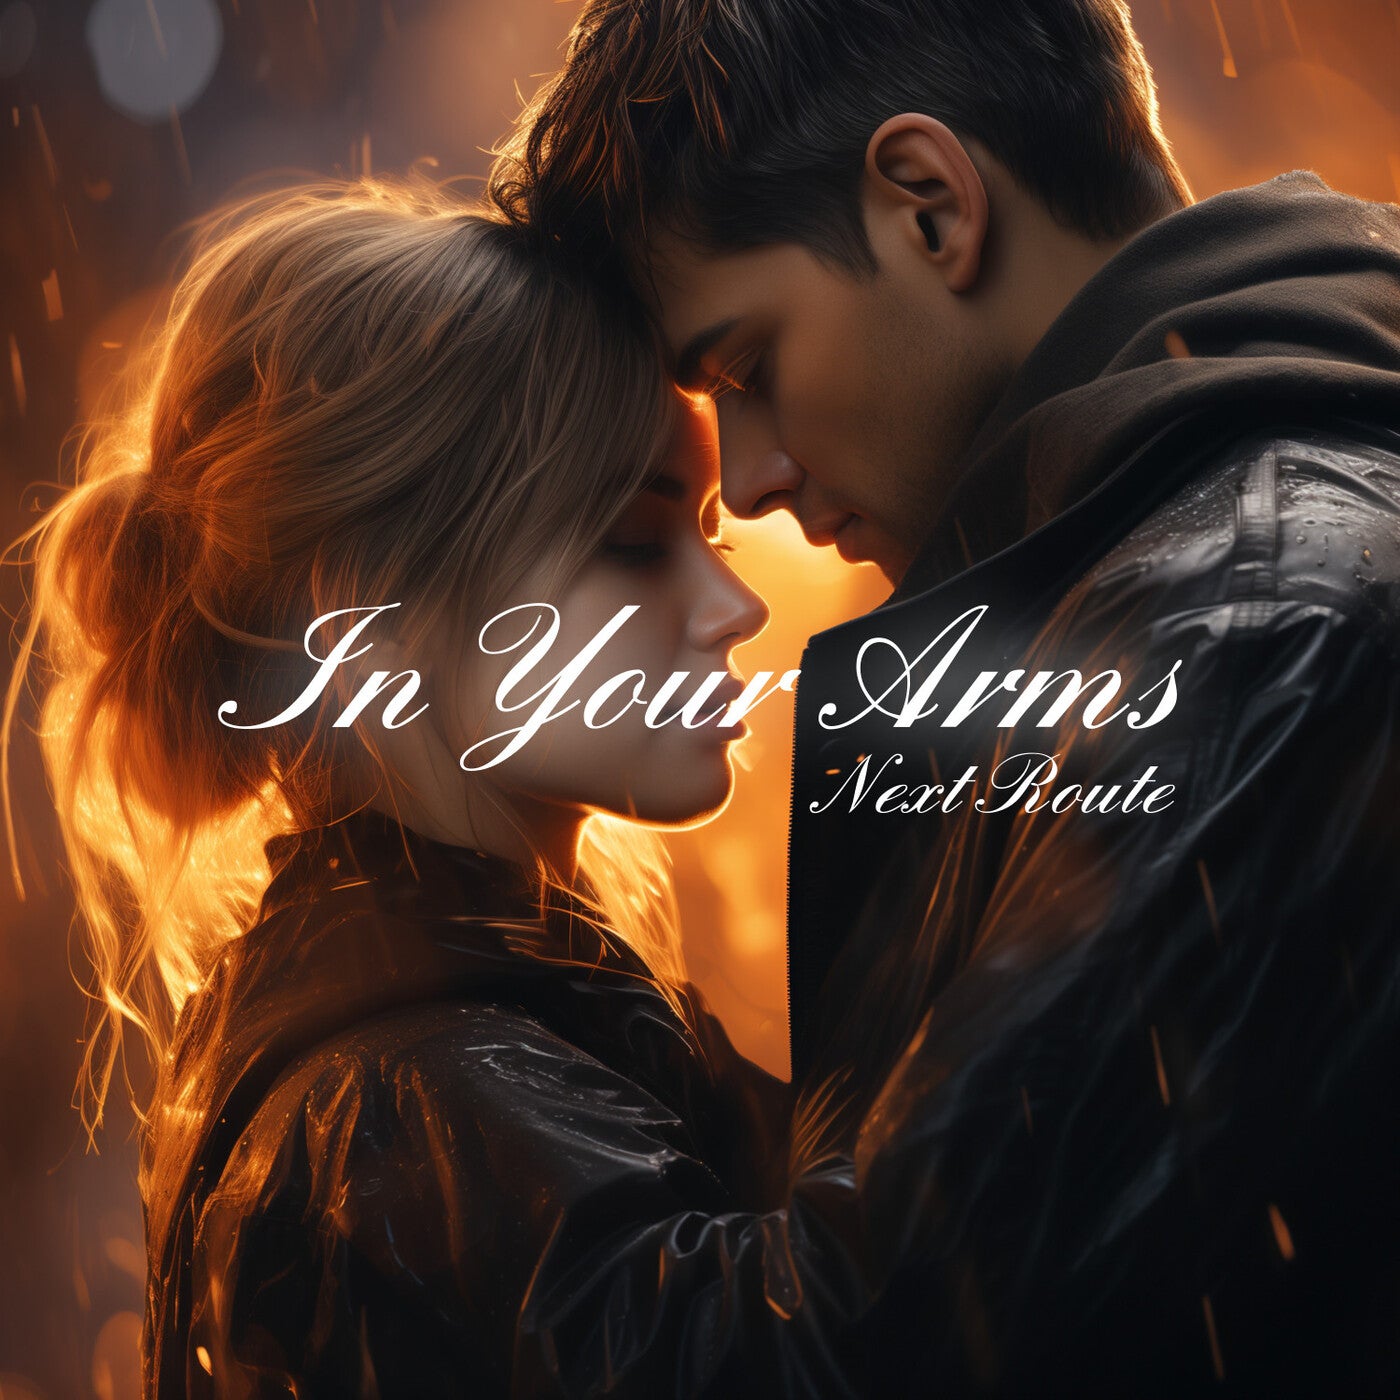 In  your arms